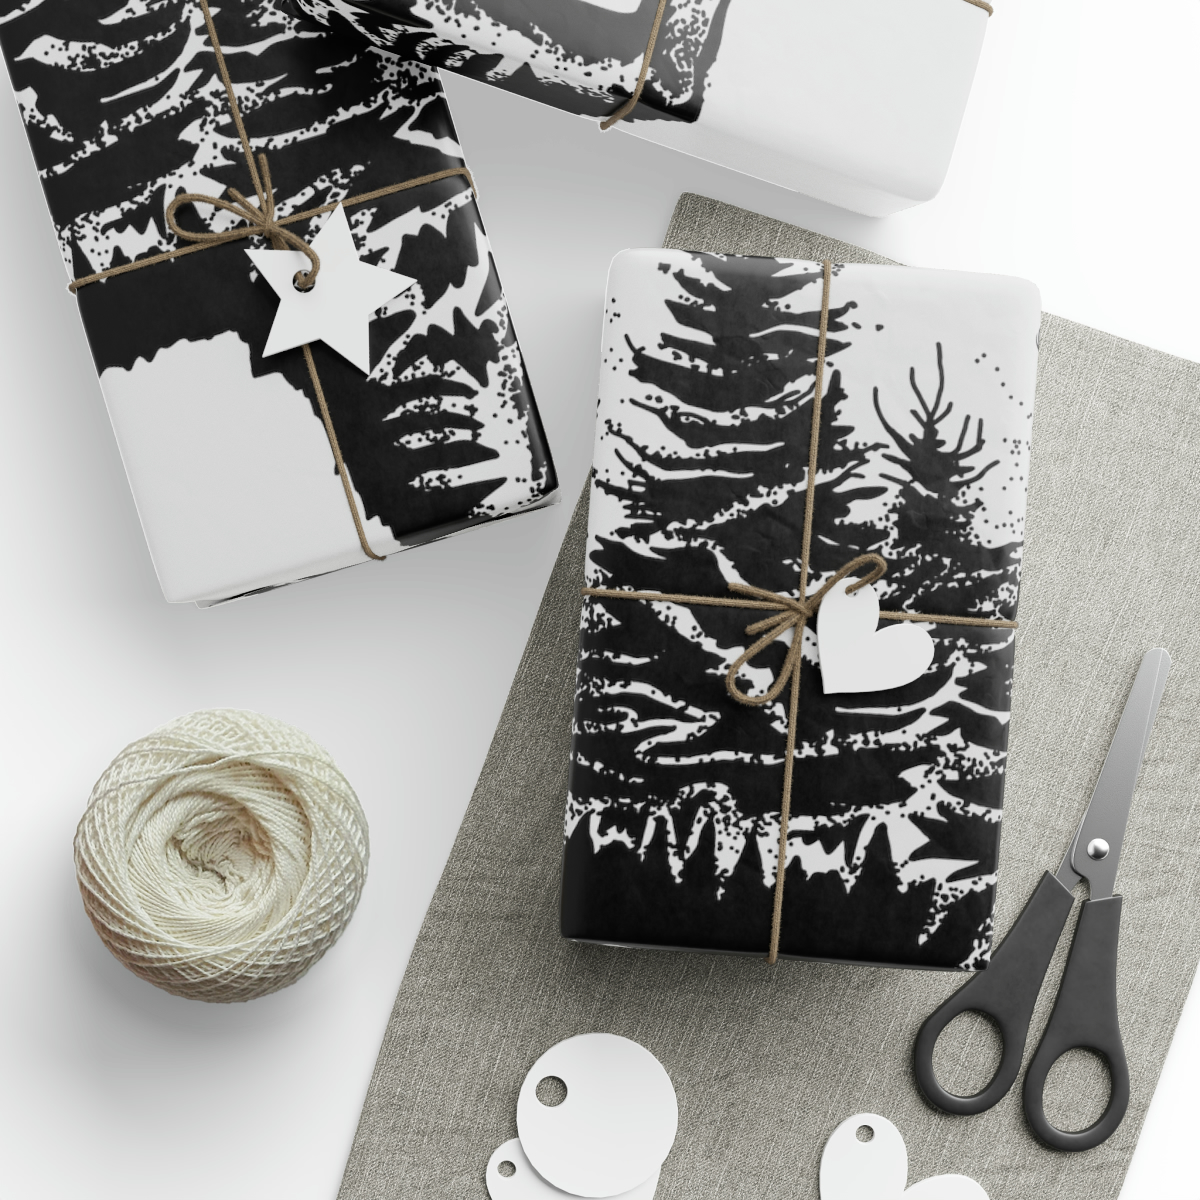 Primary image for Custom High-Quality Wrapping Paper with Forest Bear Design, Available in 3 Sizes